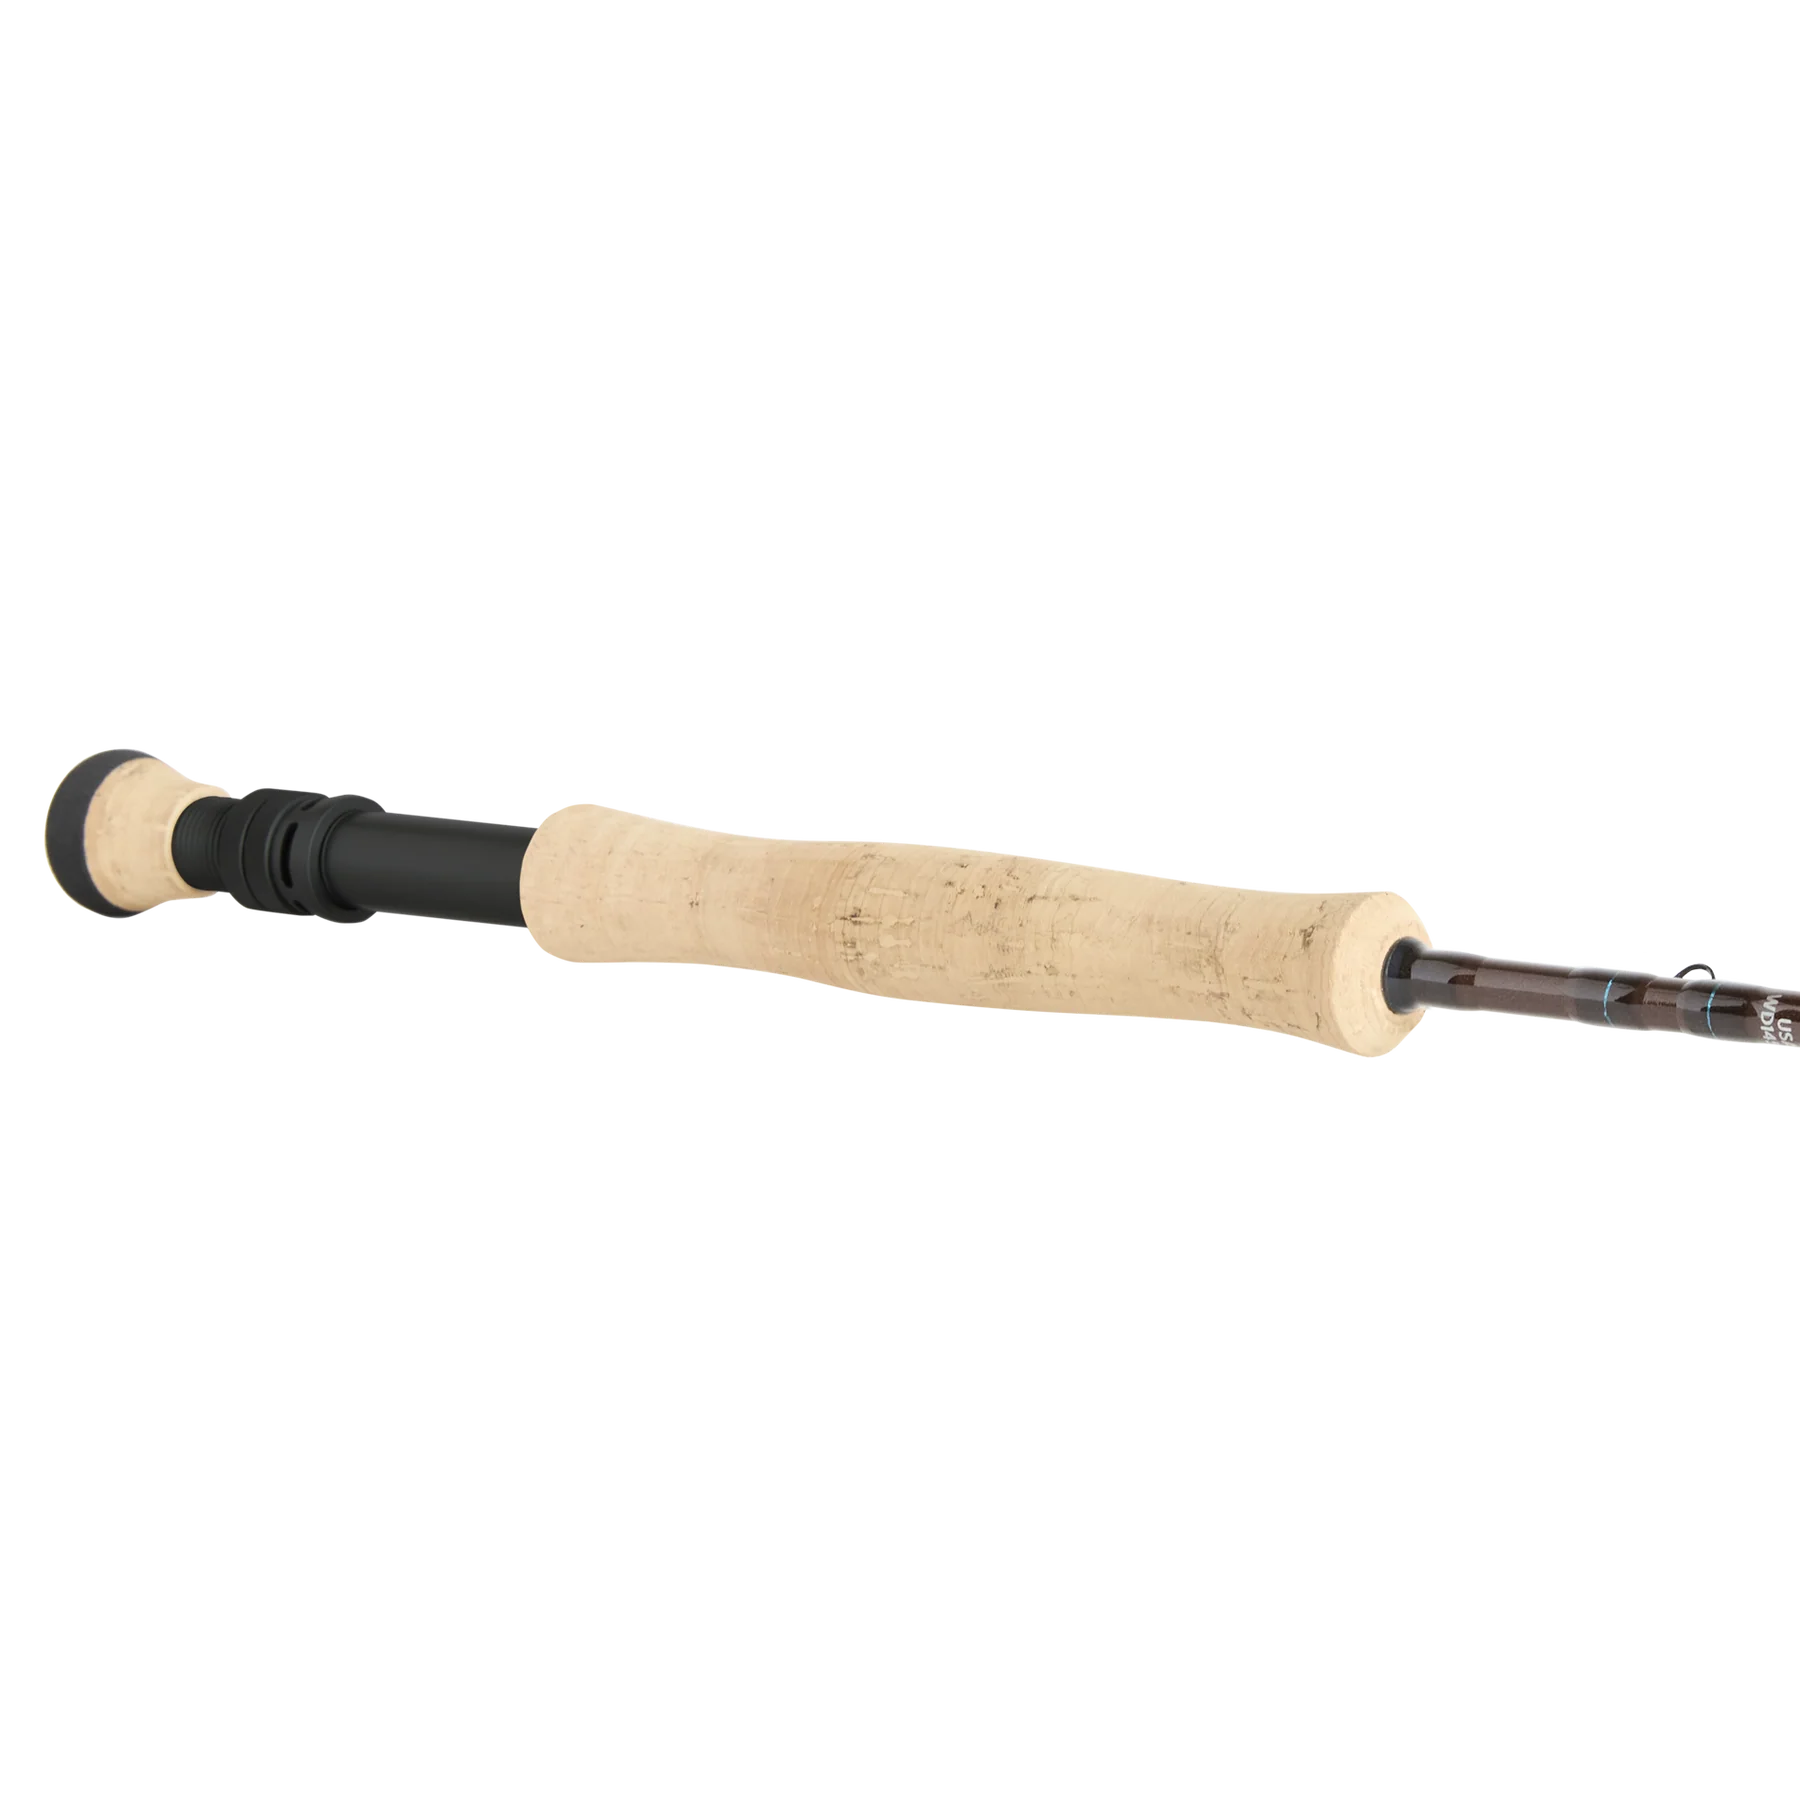 St Croix Imperial Fly Rod